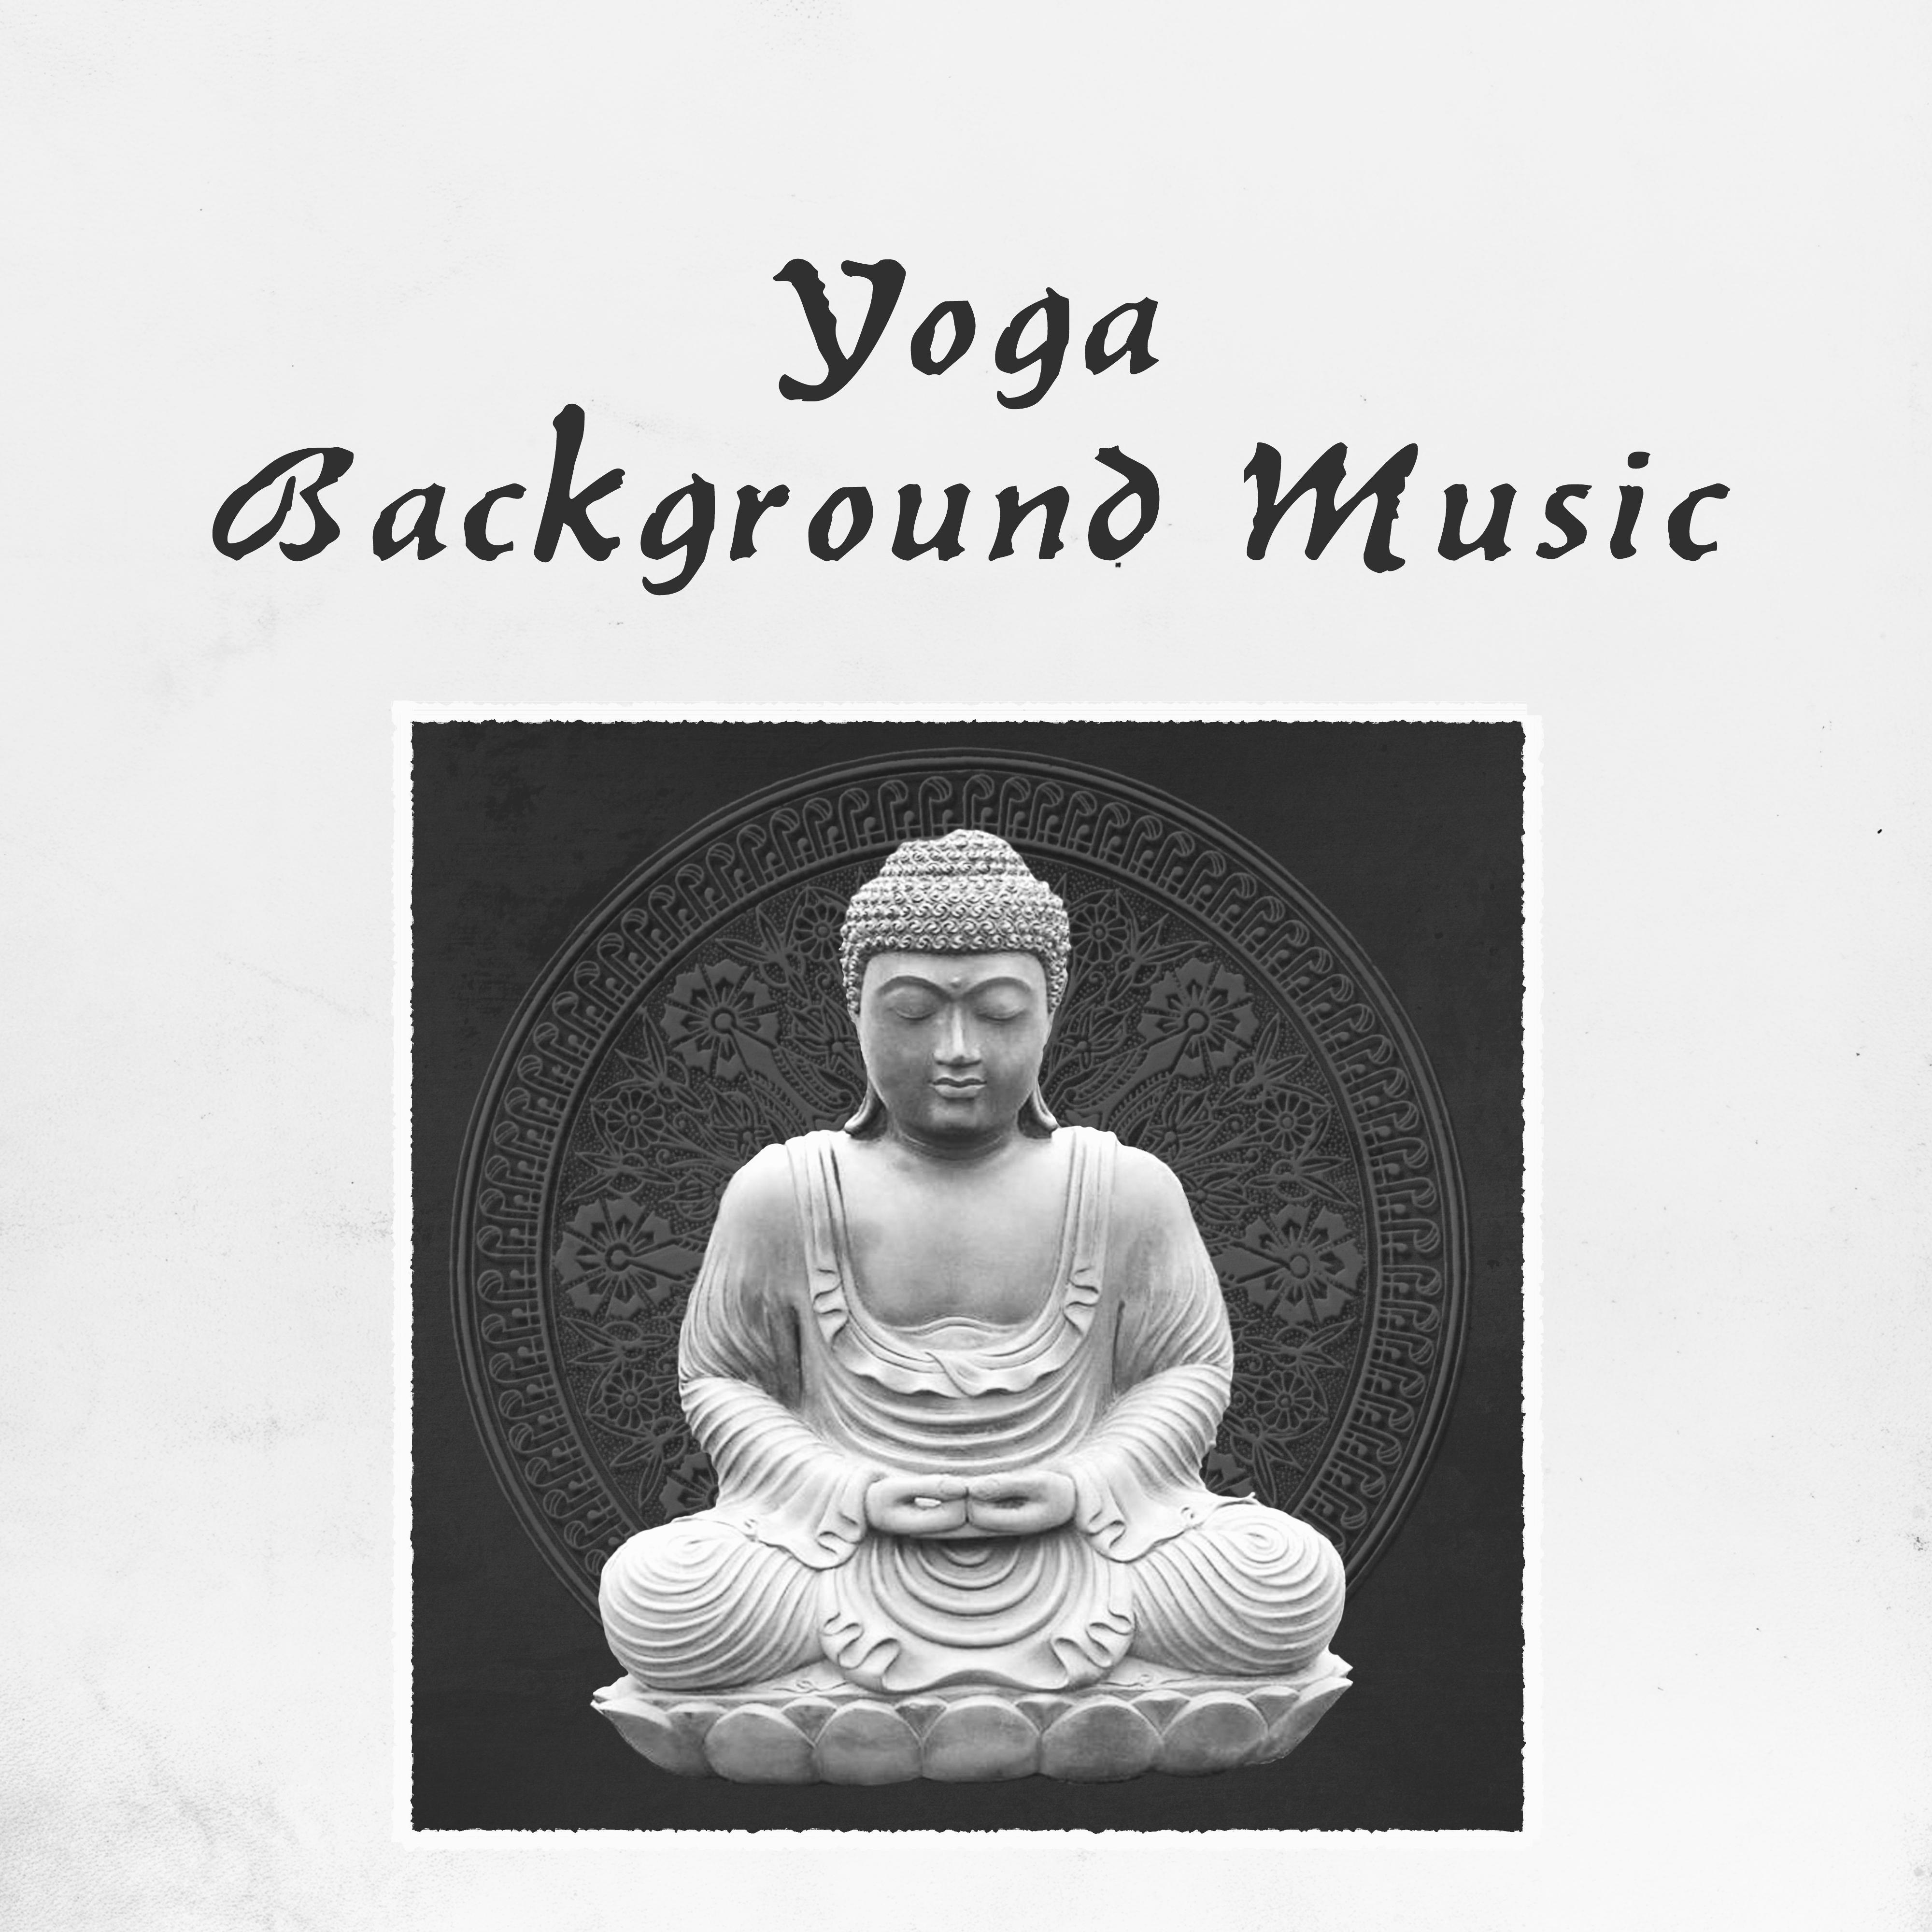 Yoga Background Music – Relaxing Nature Sounds for Yoga Meditation, The Greatest Yoga Music for Deep Meditation & Relax